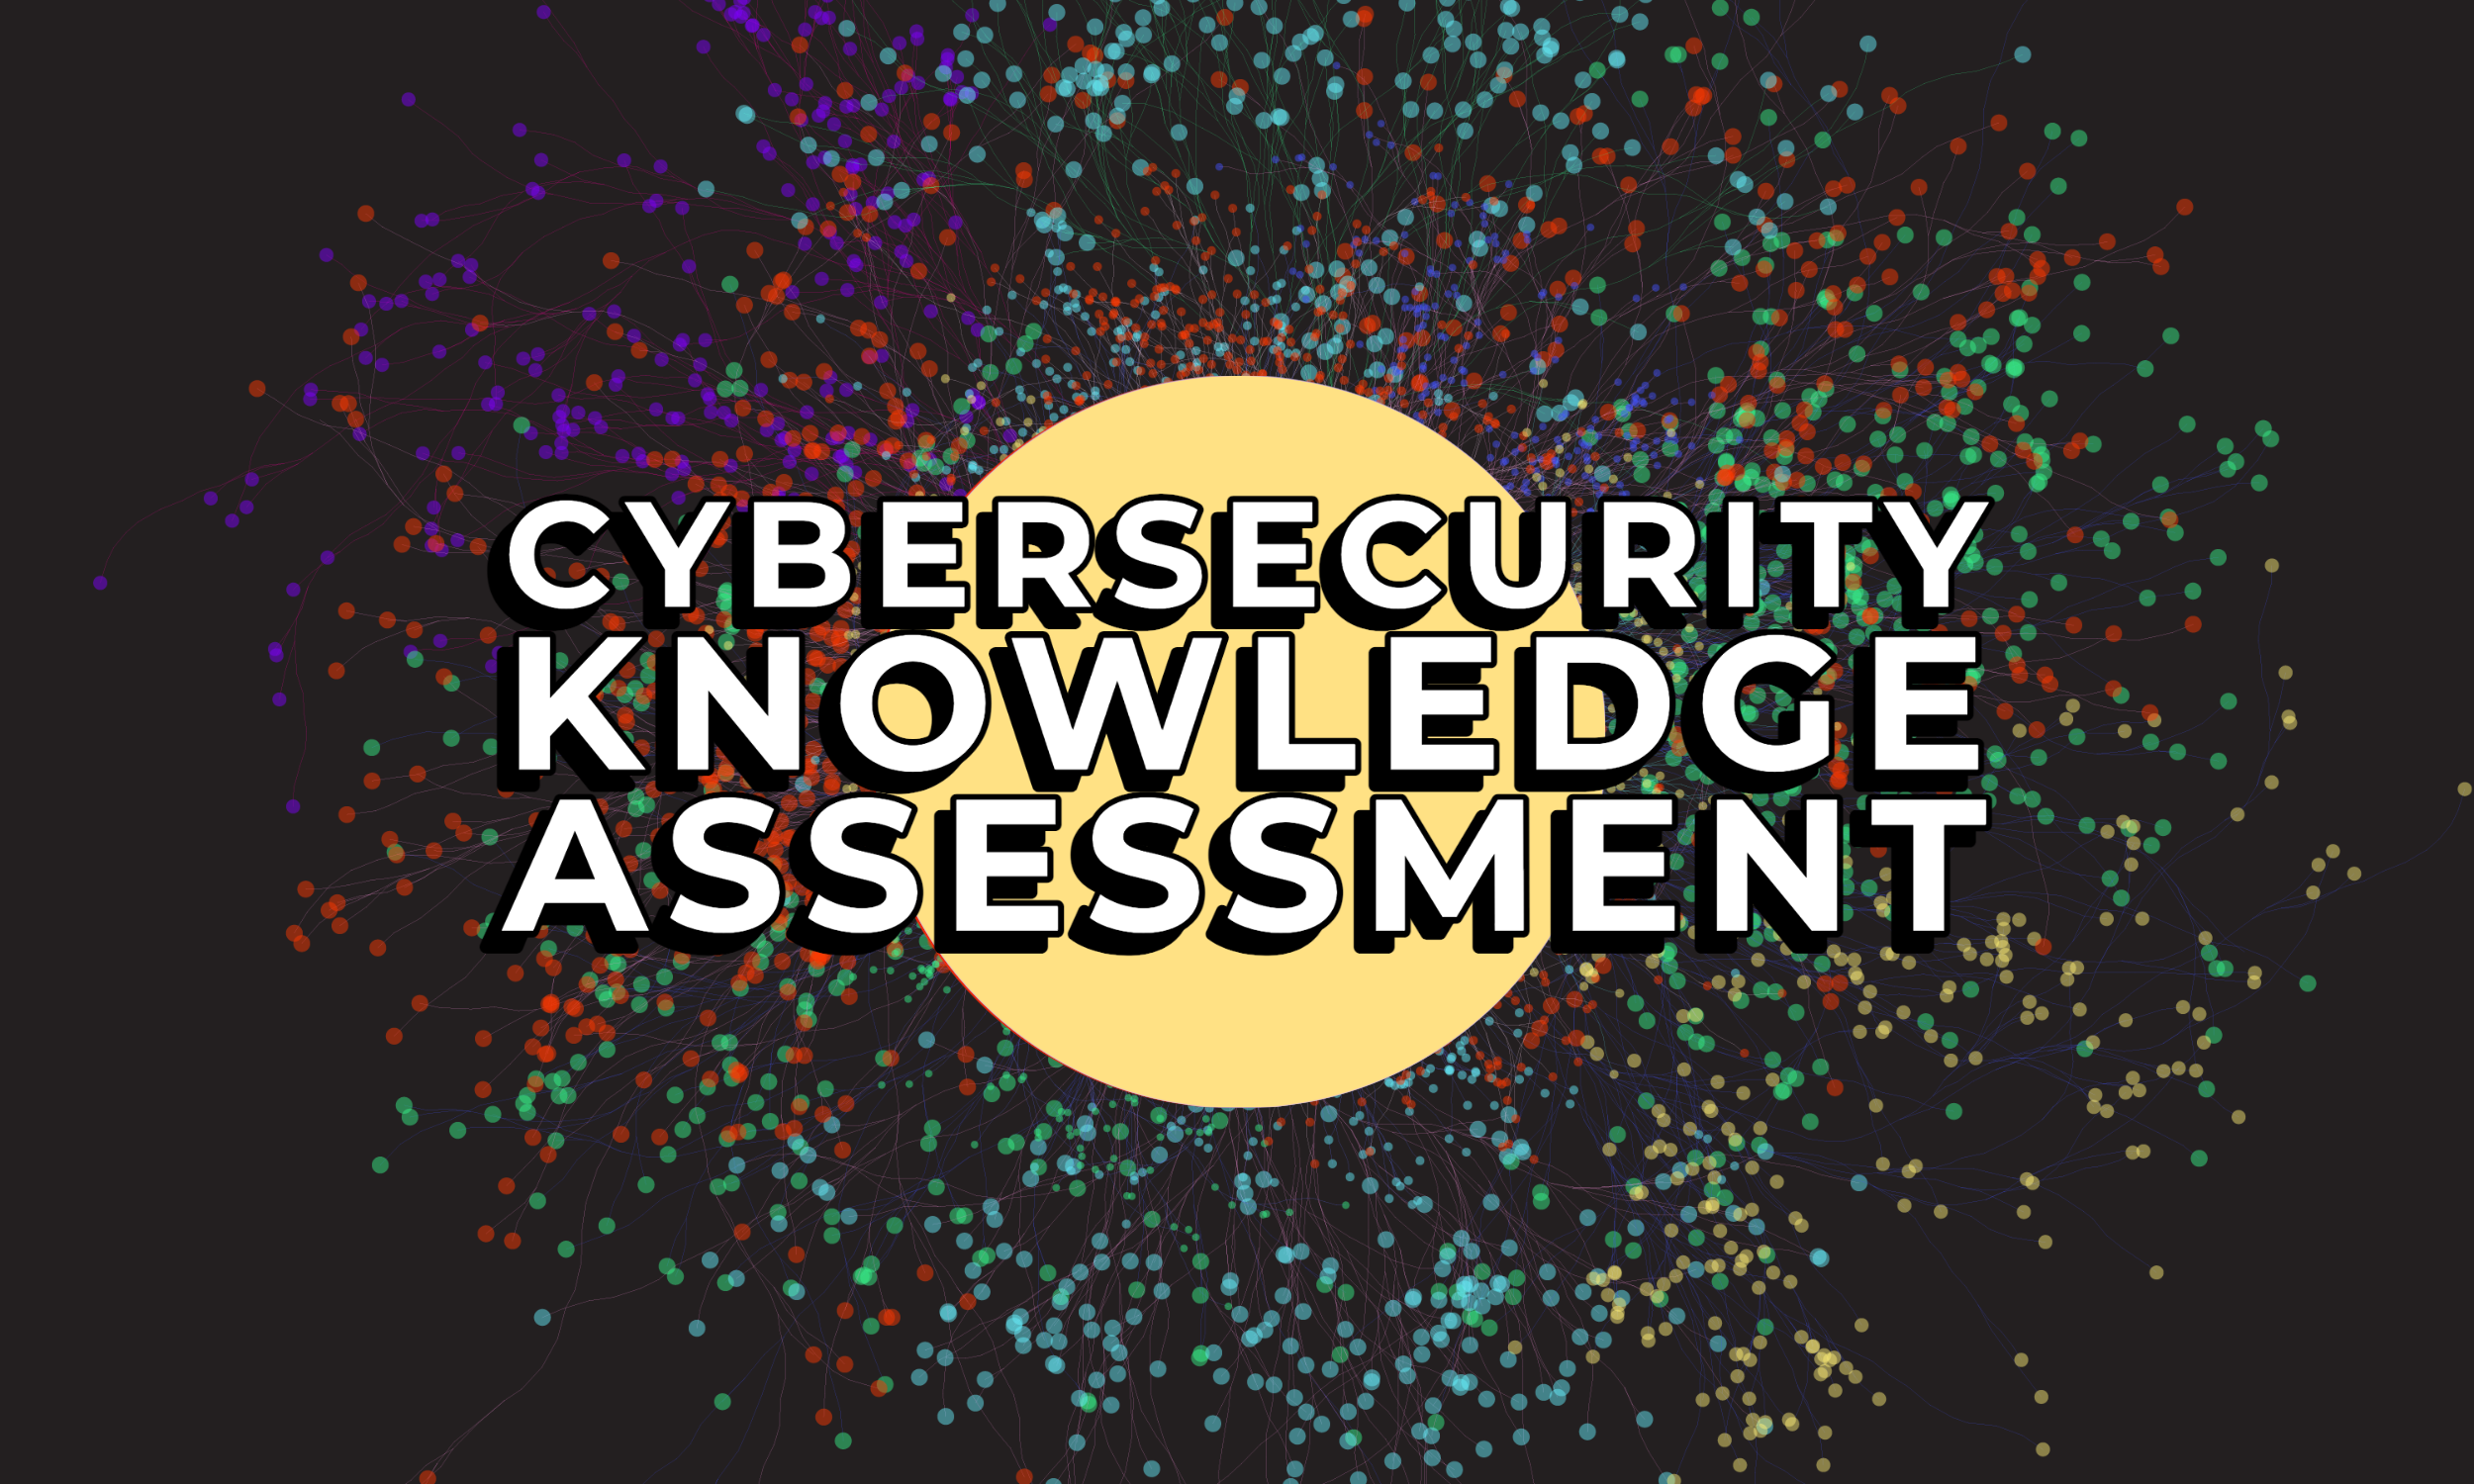 Graphic of multicolored points of light connected by lines with a light yellow circle in the middle and the words "Cybersecurity Knowledge Assessment"